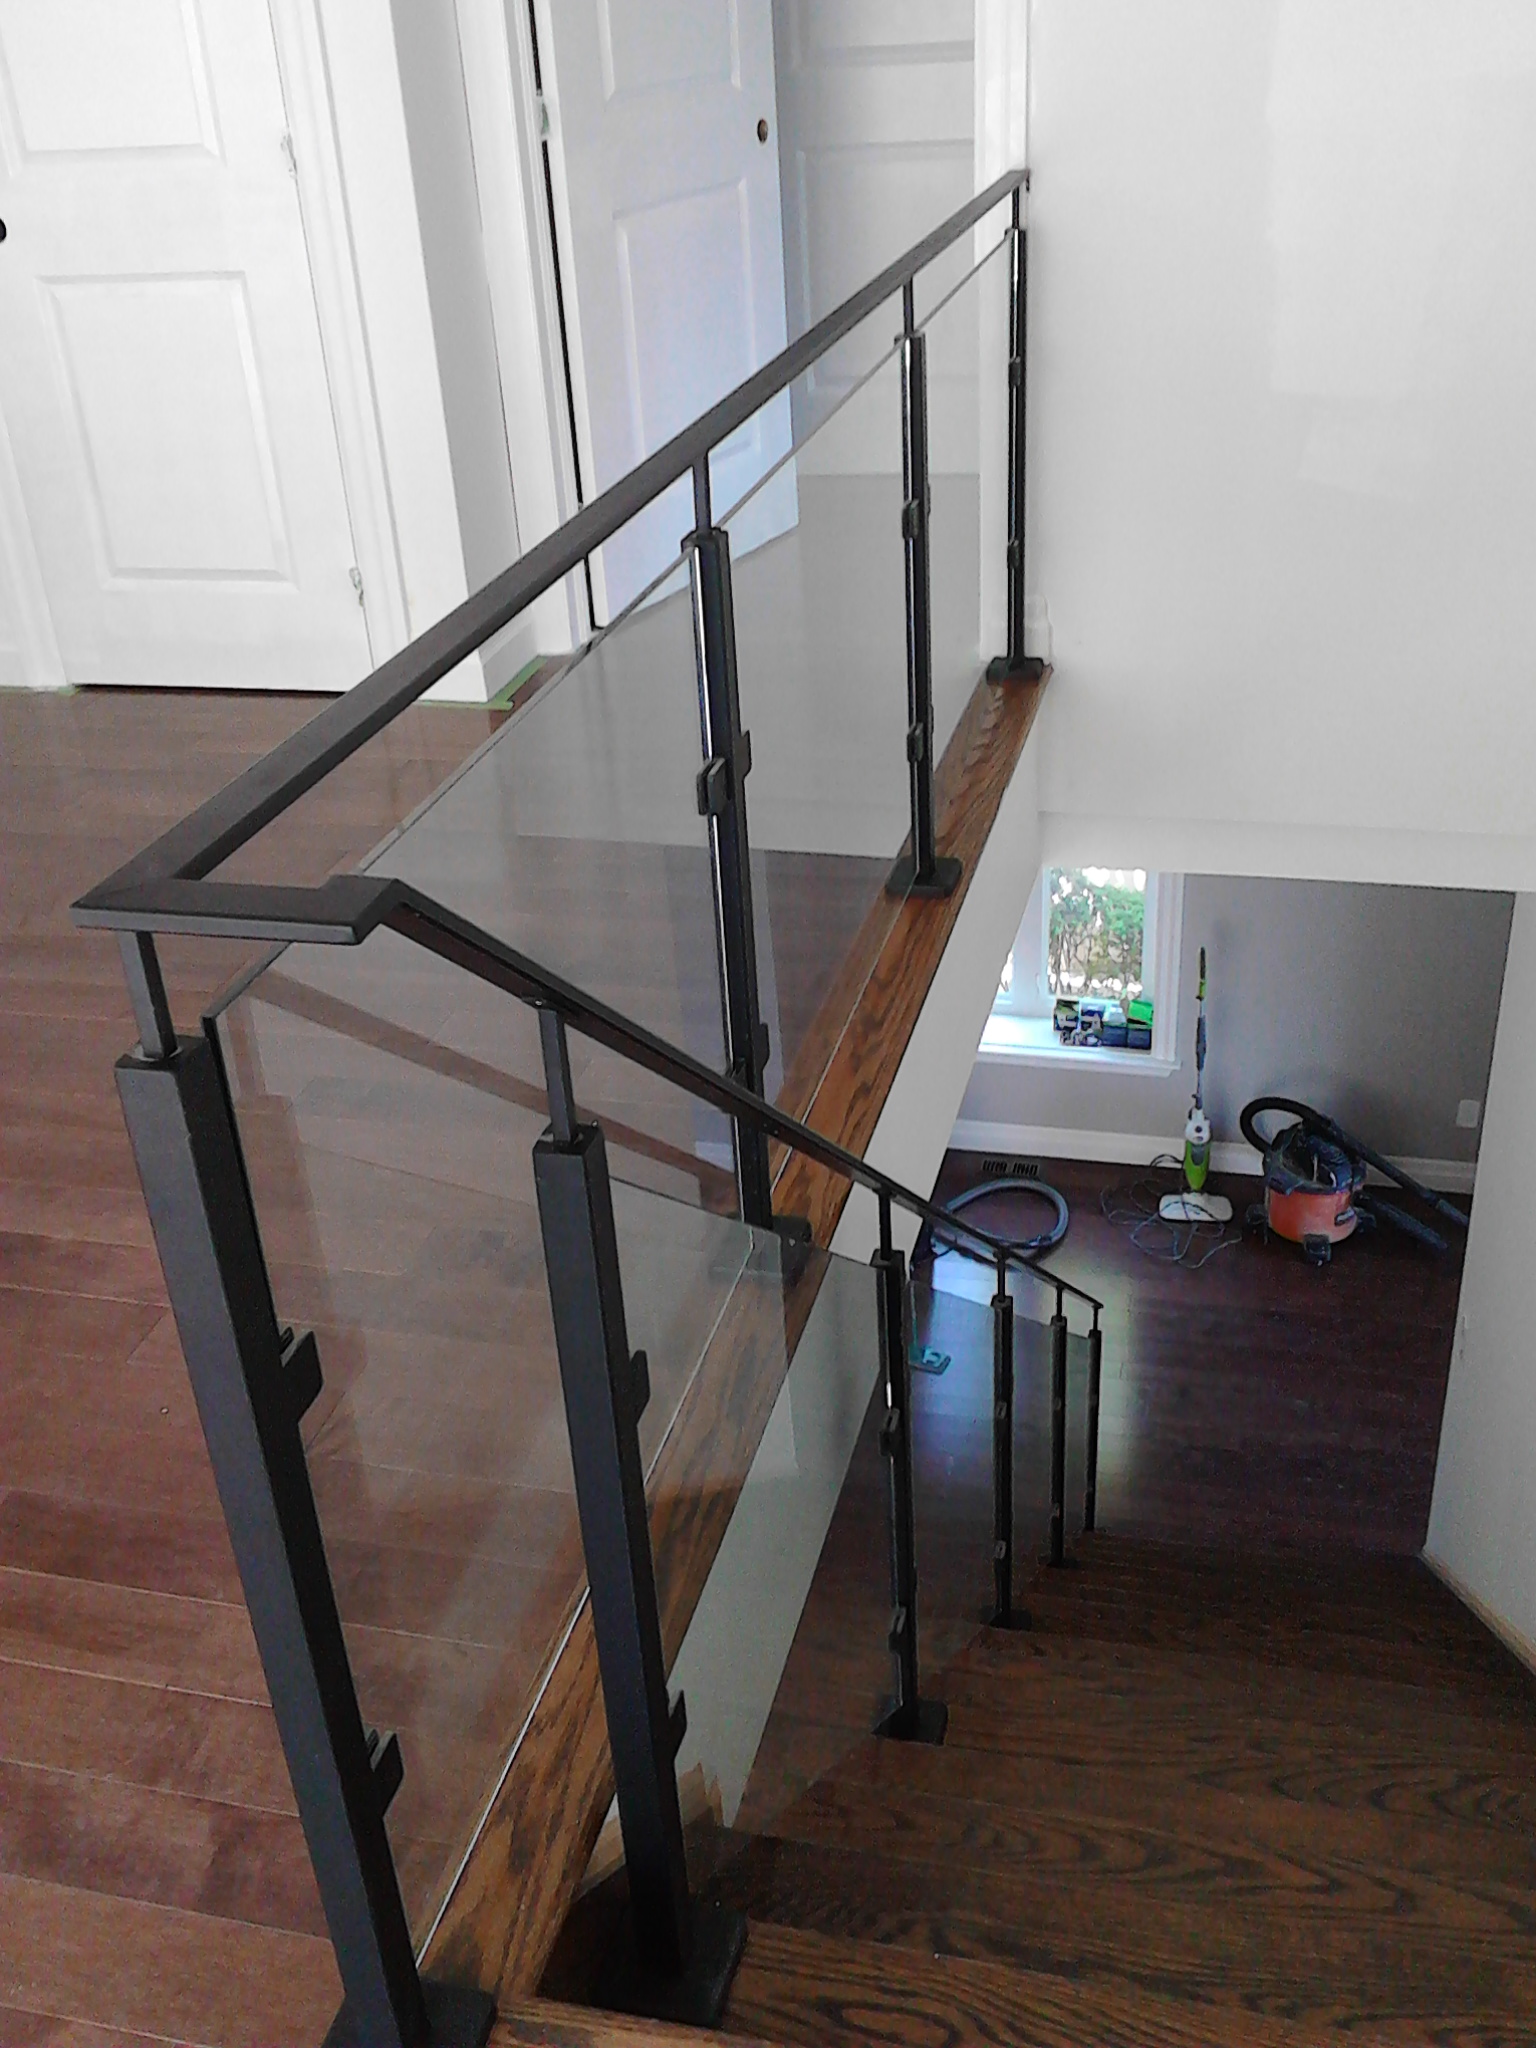 Fun Perks to Glass Railings in Your Home